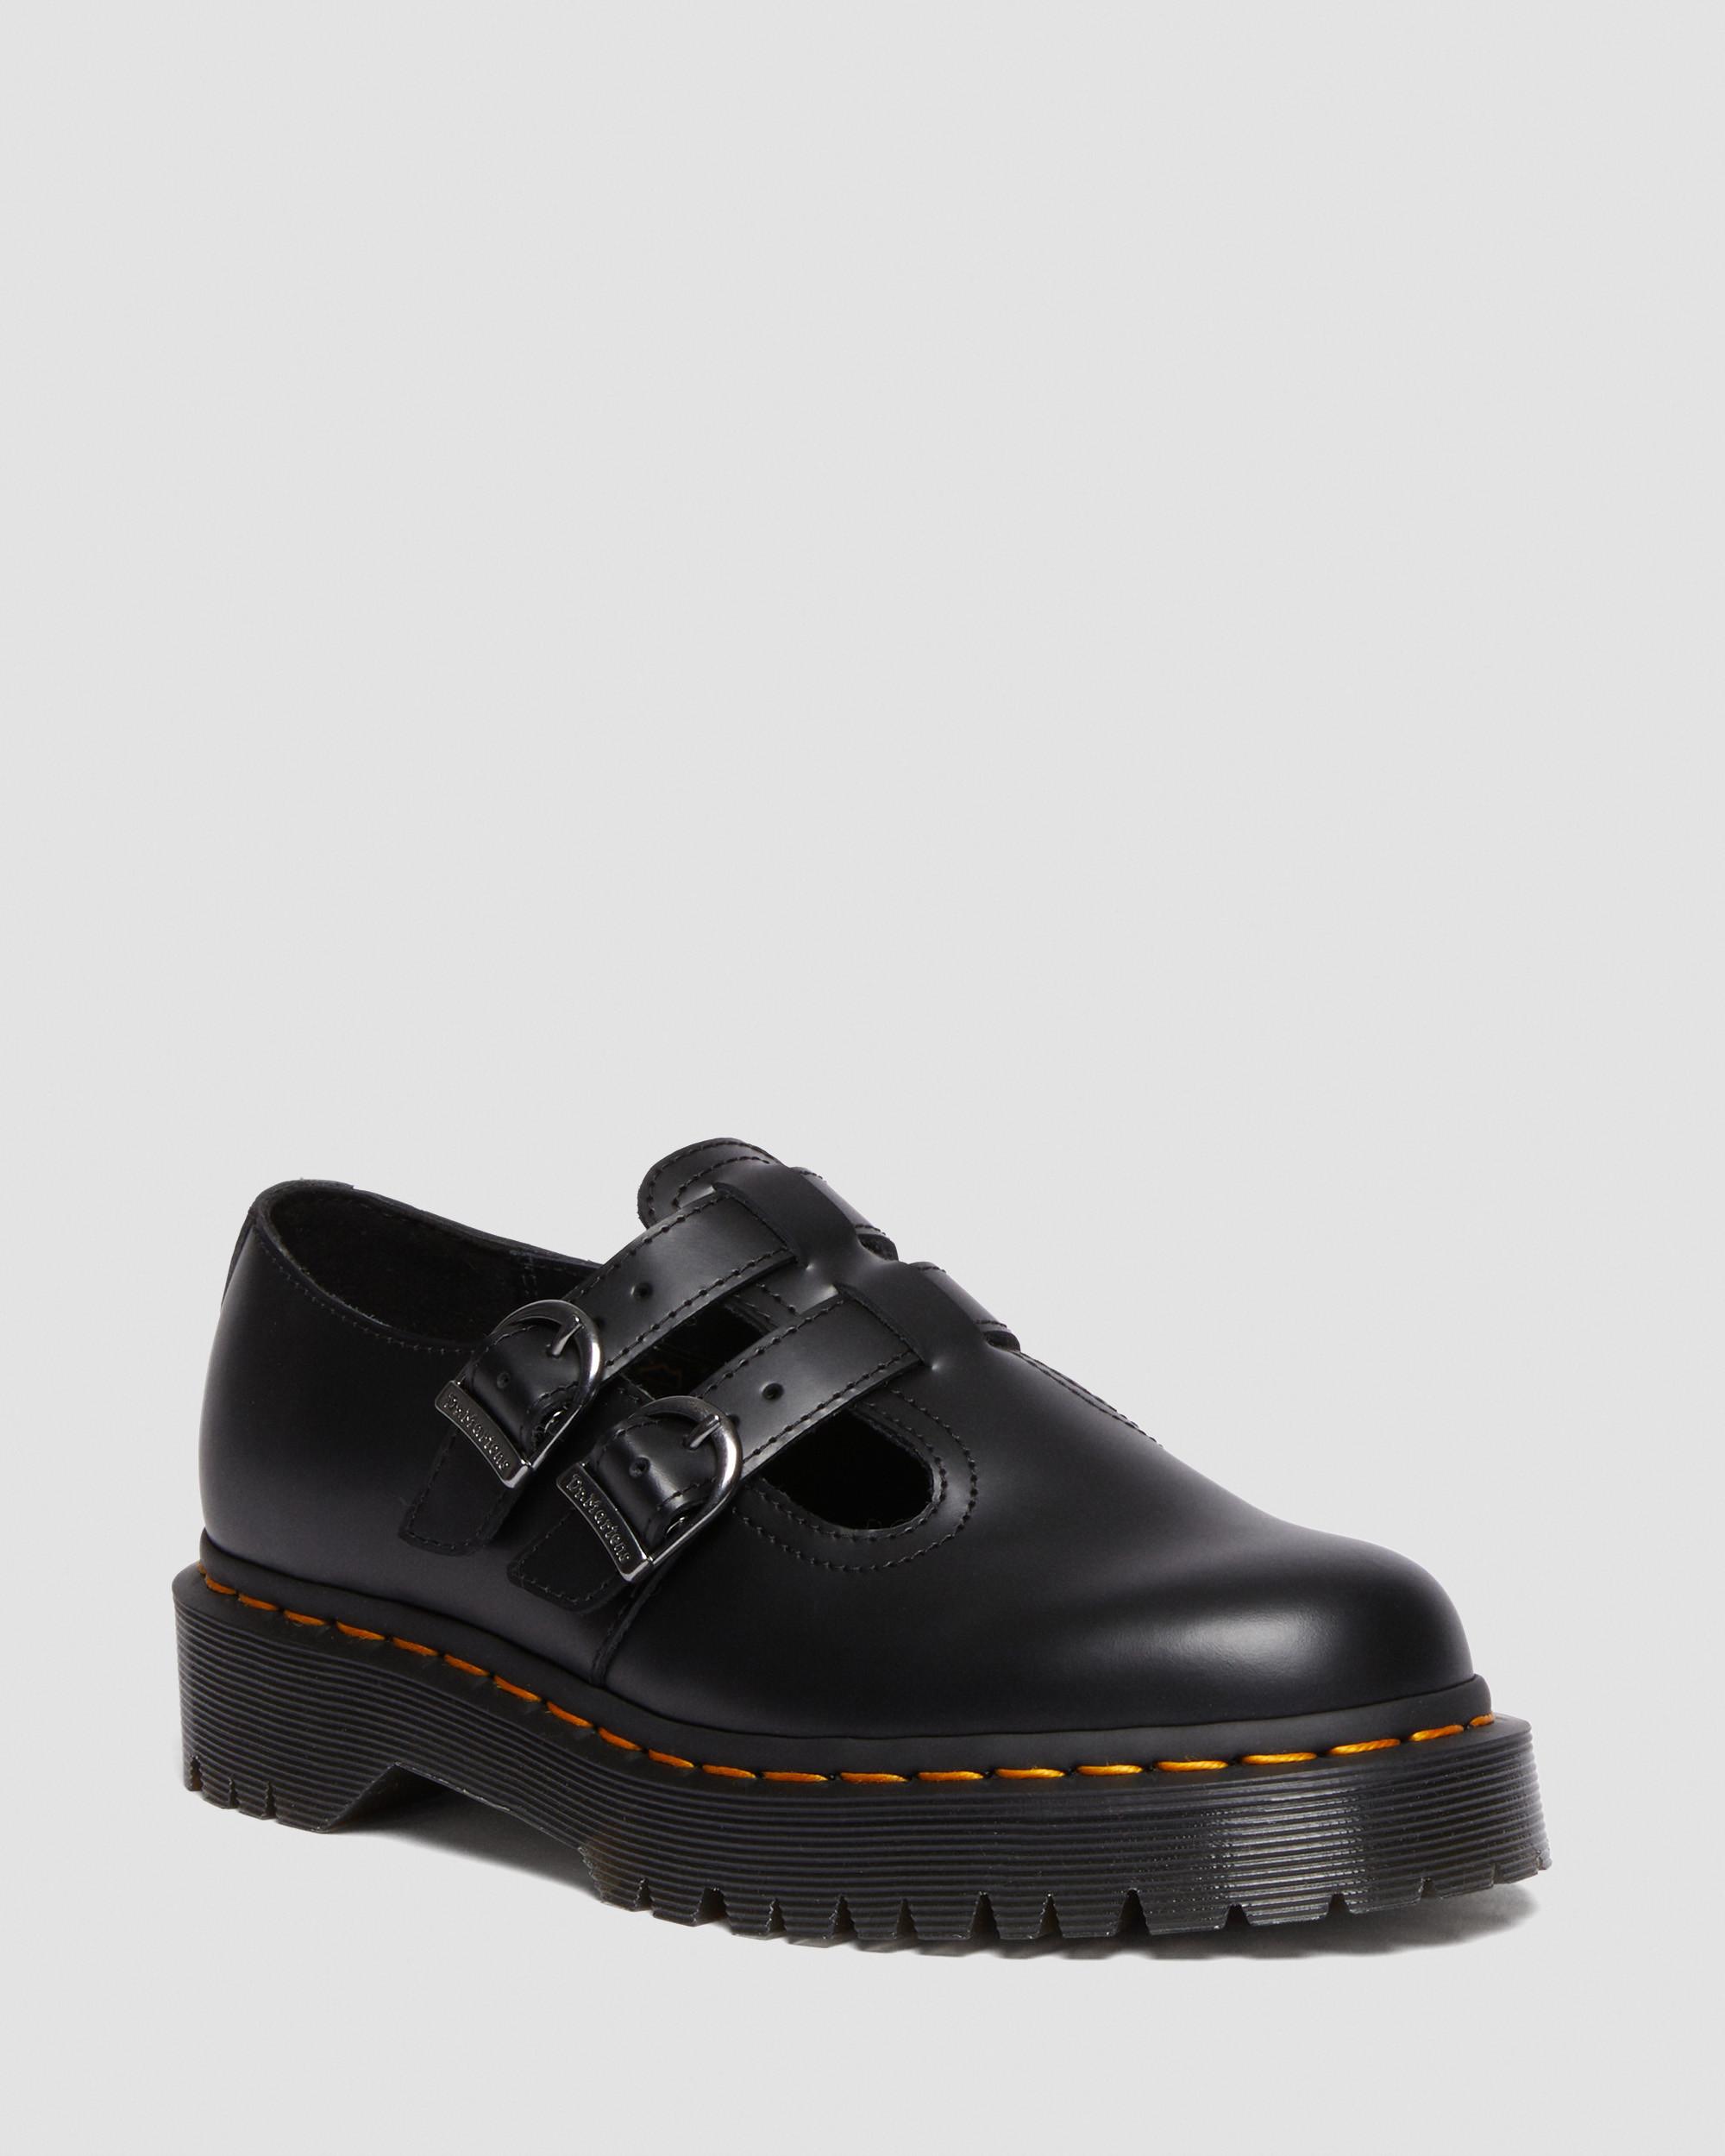 8065 II Bex Smooth Leather Platform Mary Jane Shoes in Black | Dr. Martens